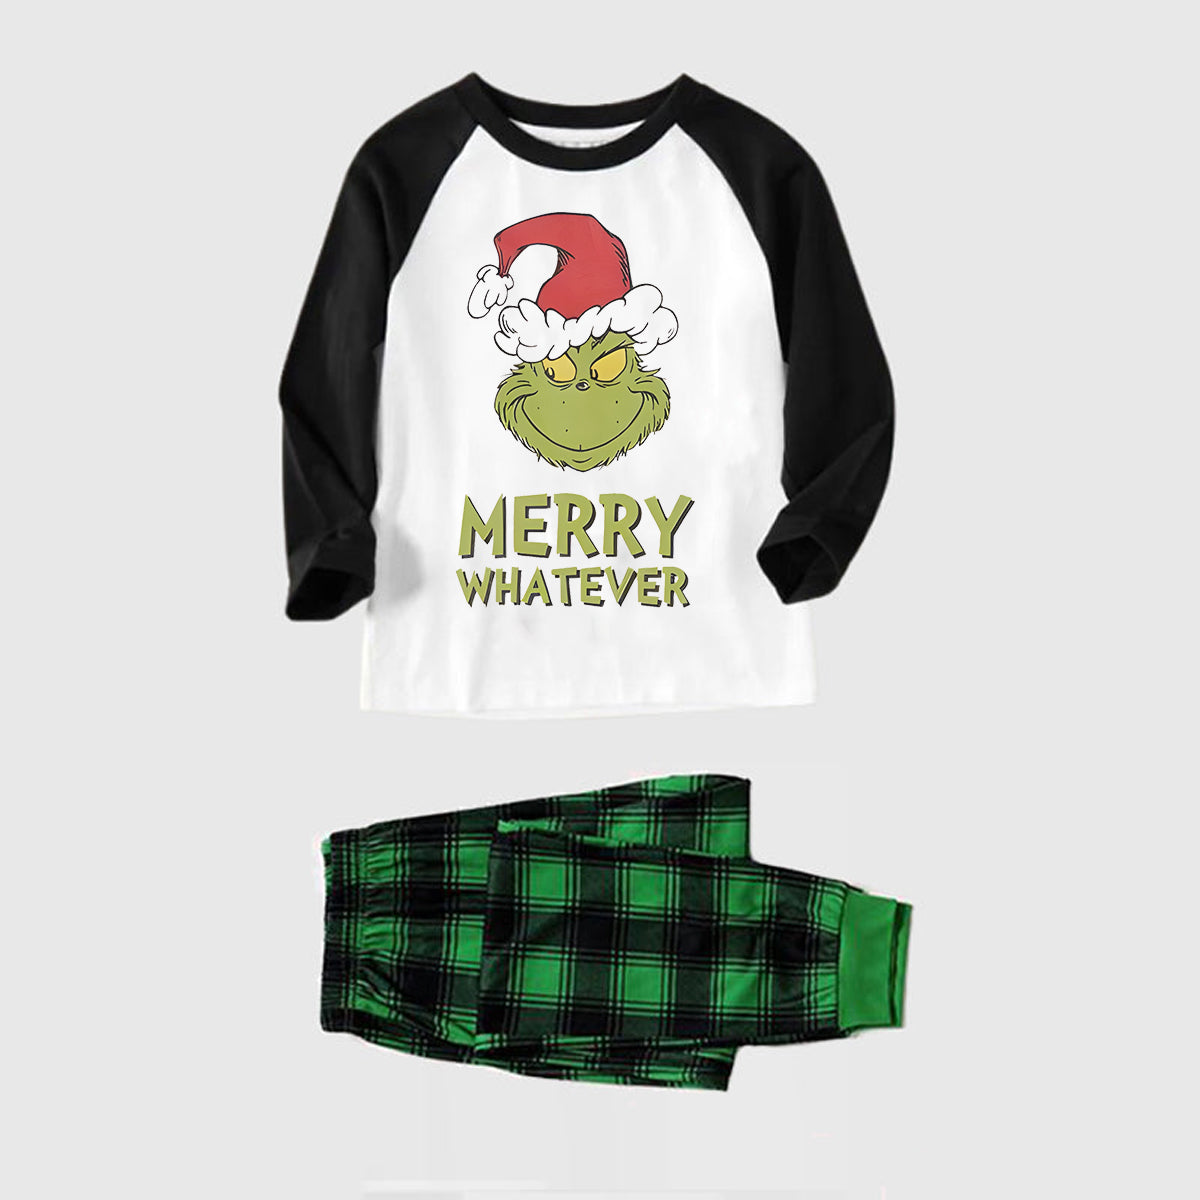 Christmas Cartoon and 'Merry Whatever' Letter Print Contrast Tops and Black and Gren Plaid Pants Family Matching Pajamas Sets With Dog Bandana